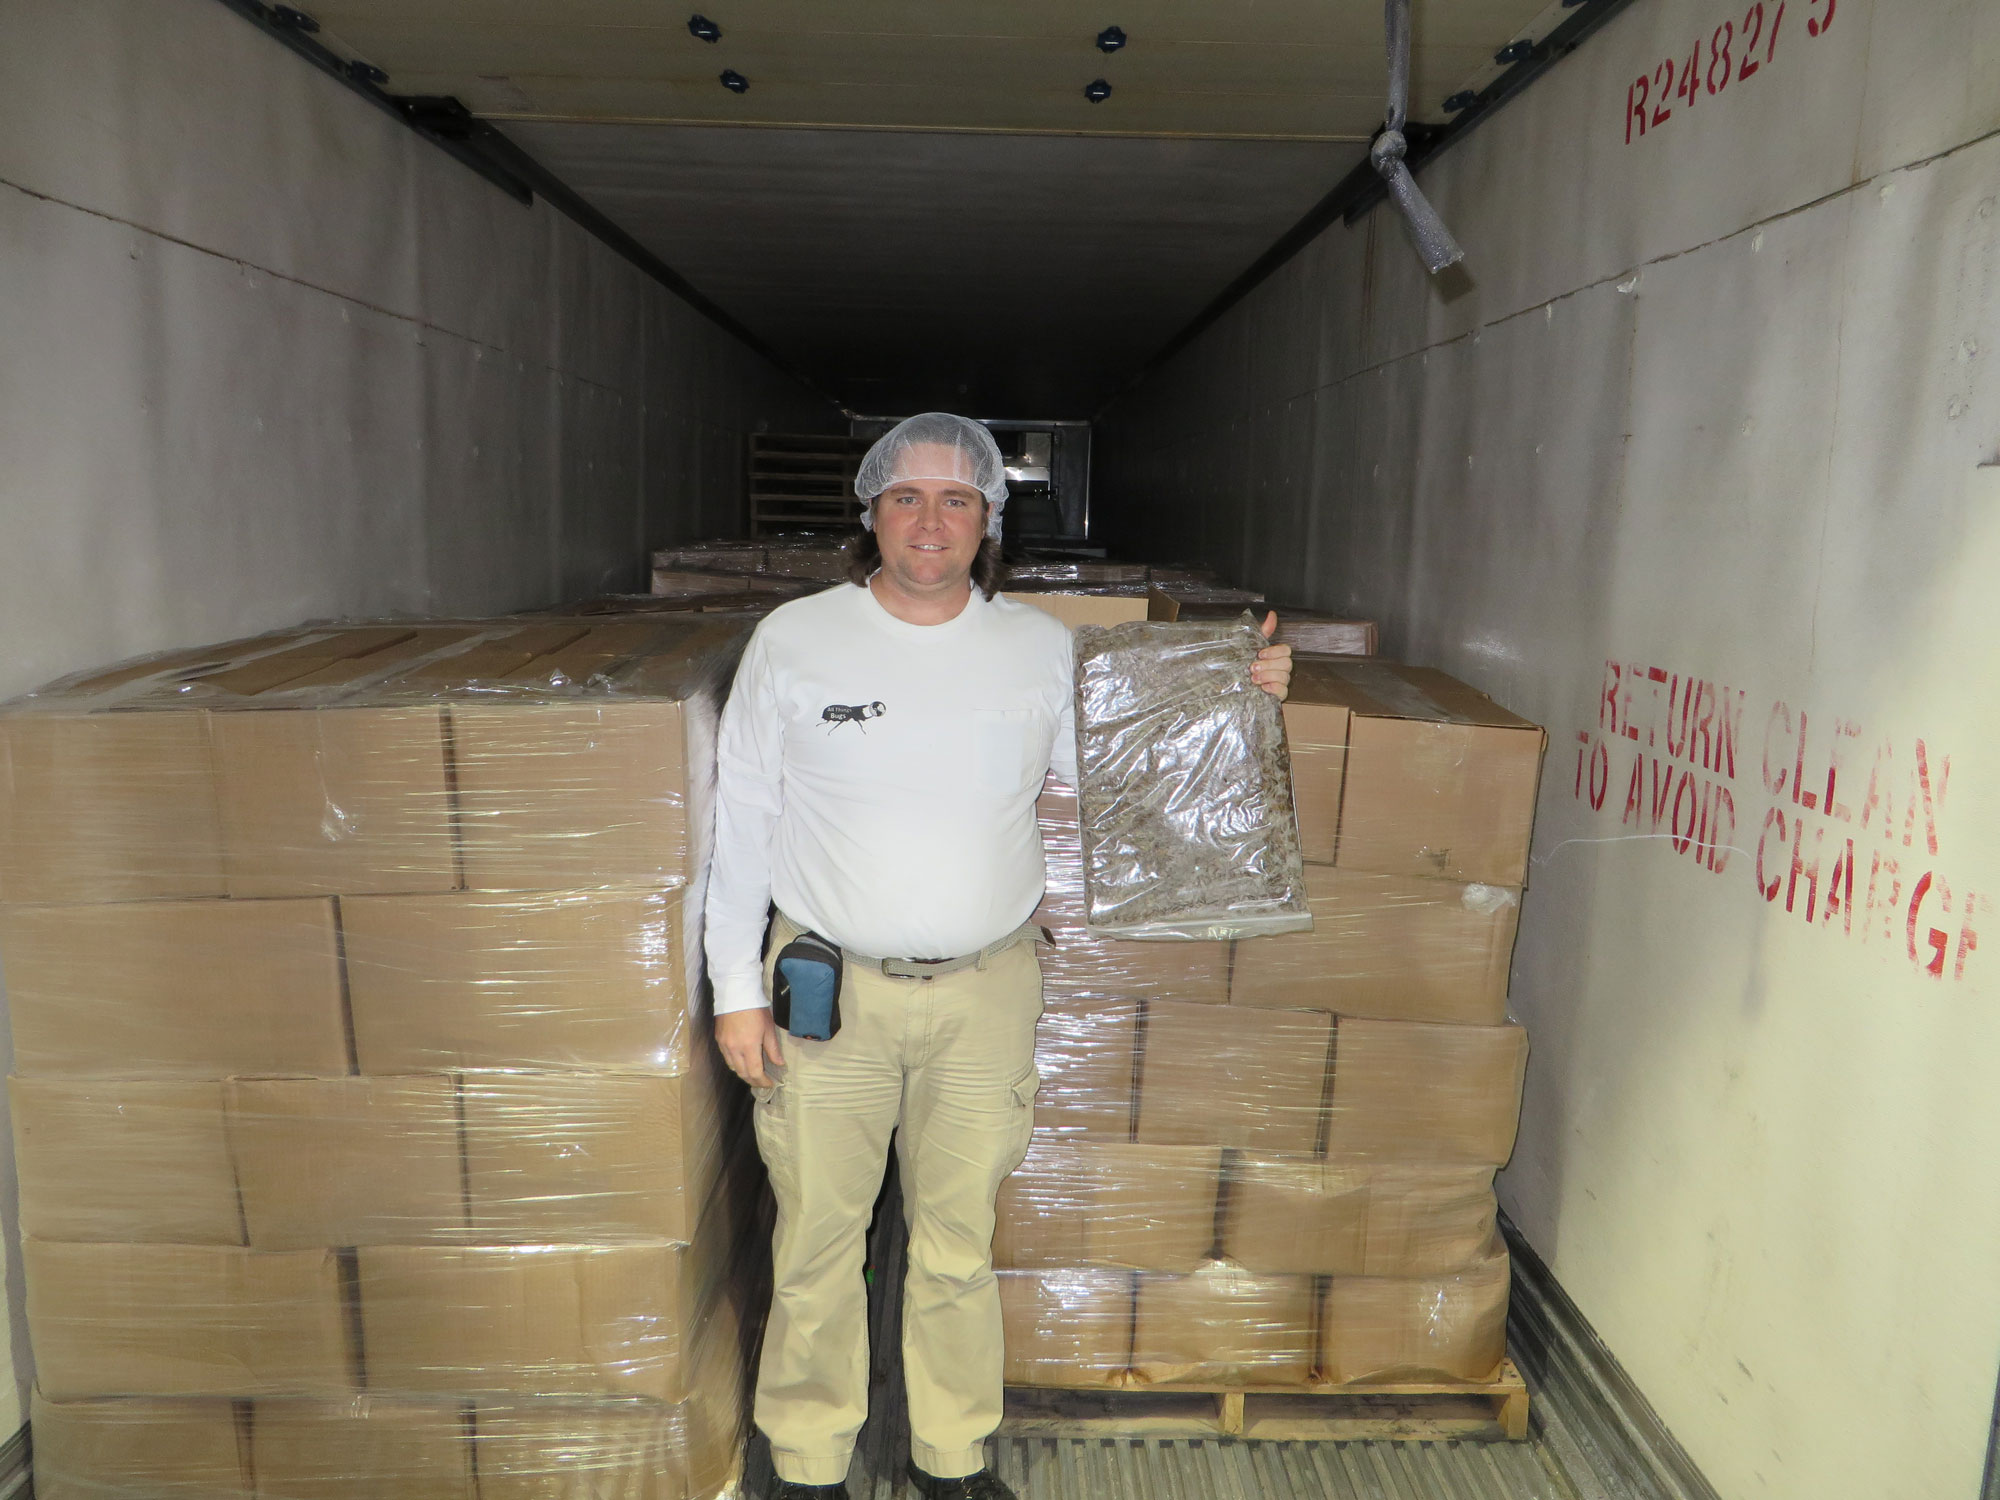 Dr. Aaron Dossey holding the product beside boxes